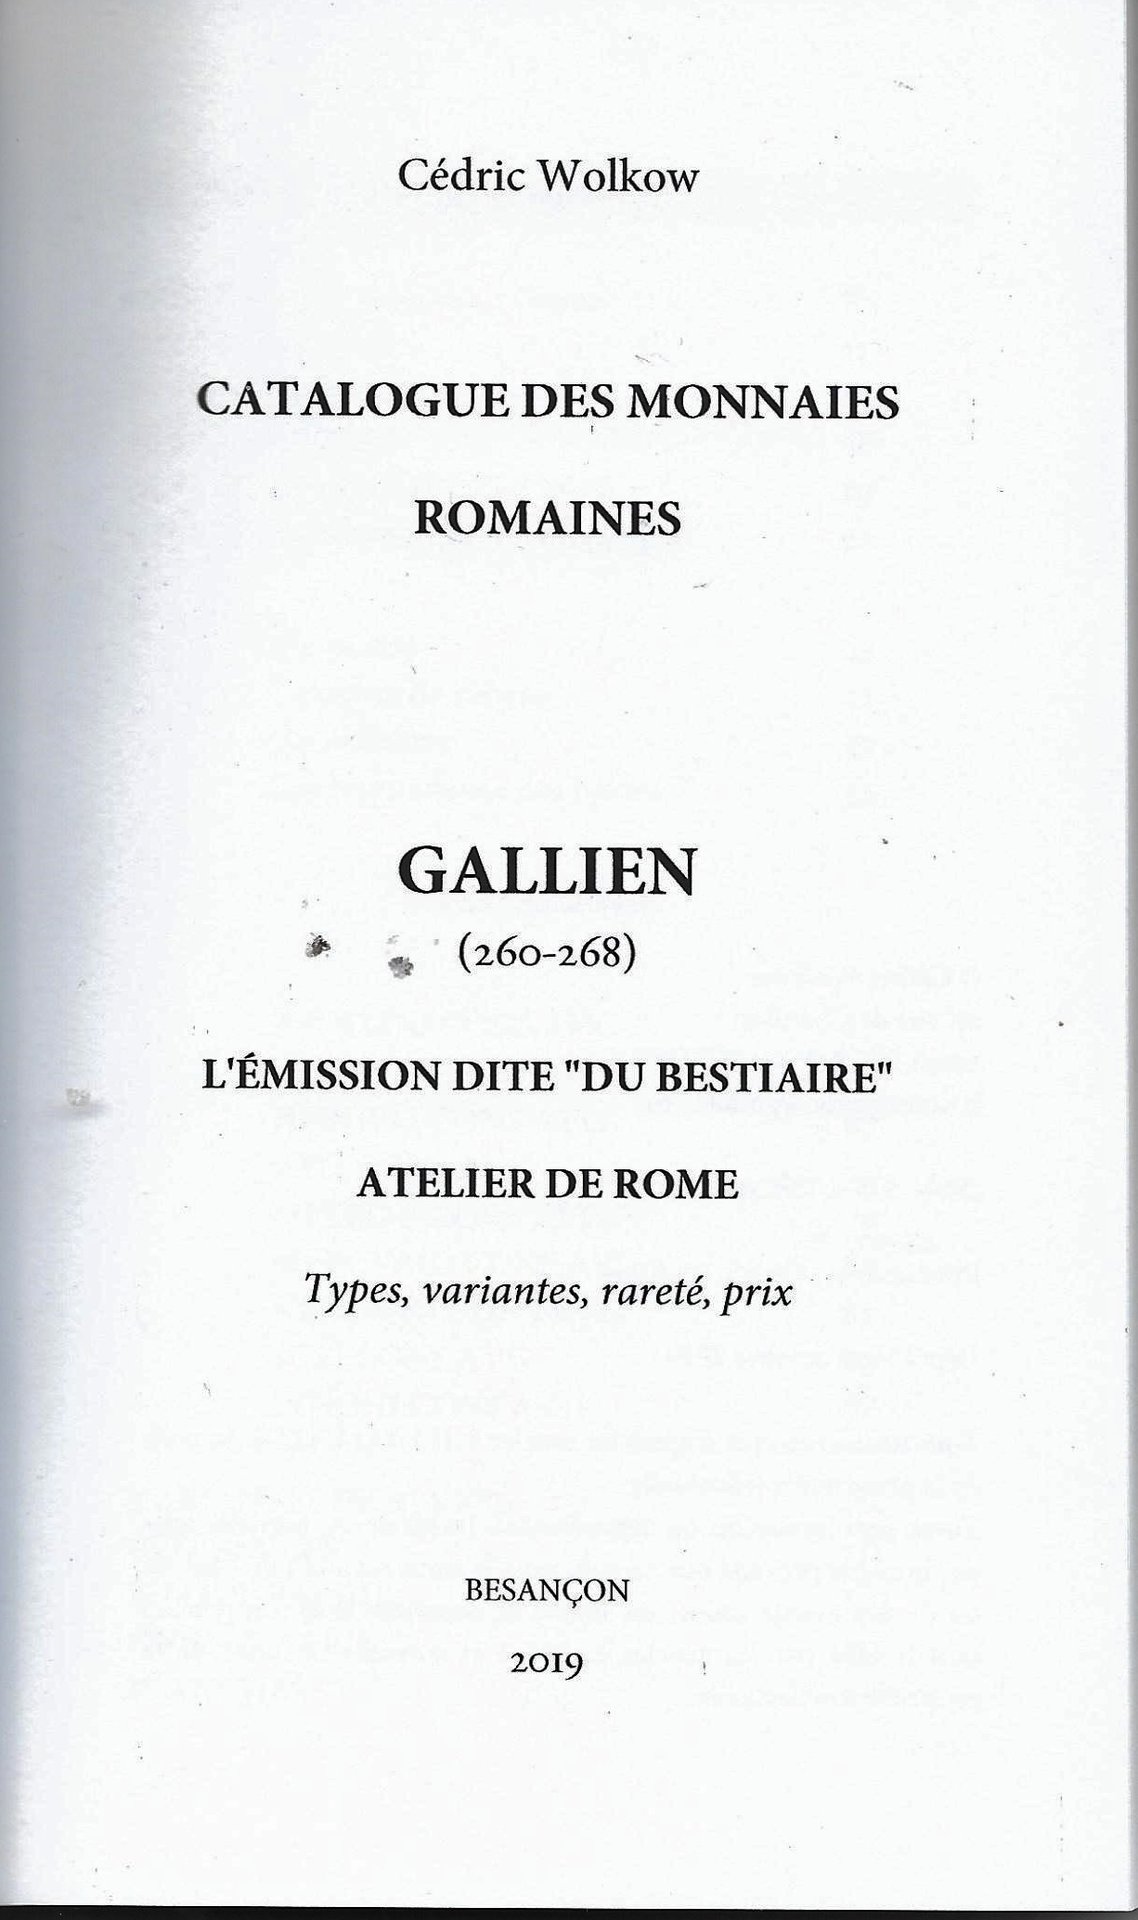 Wolkow title page.jpg